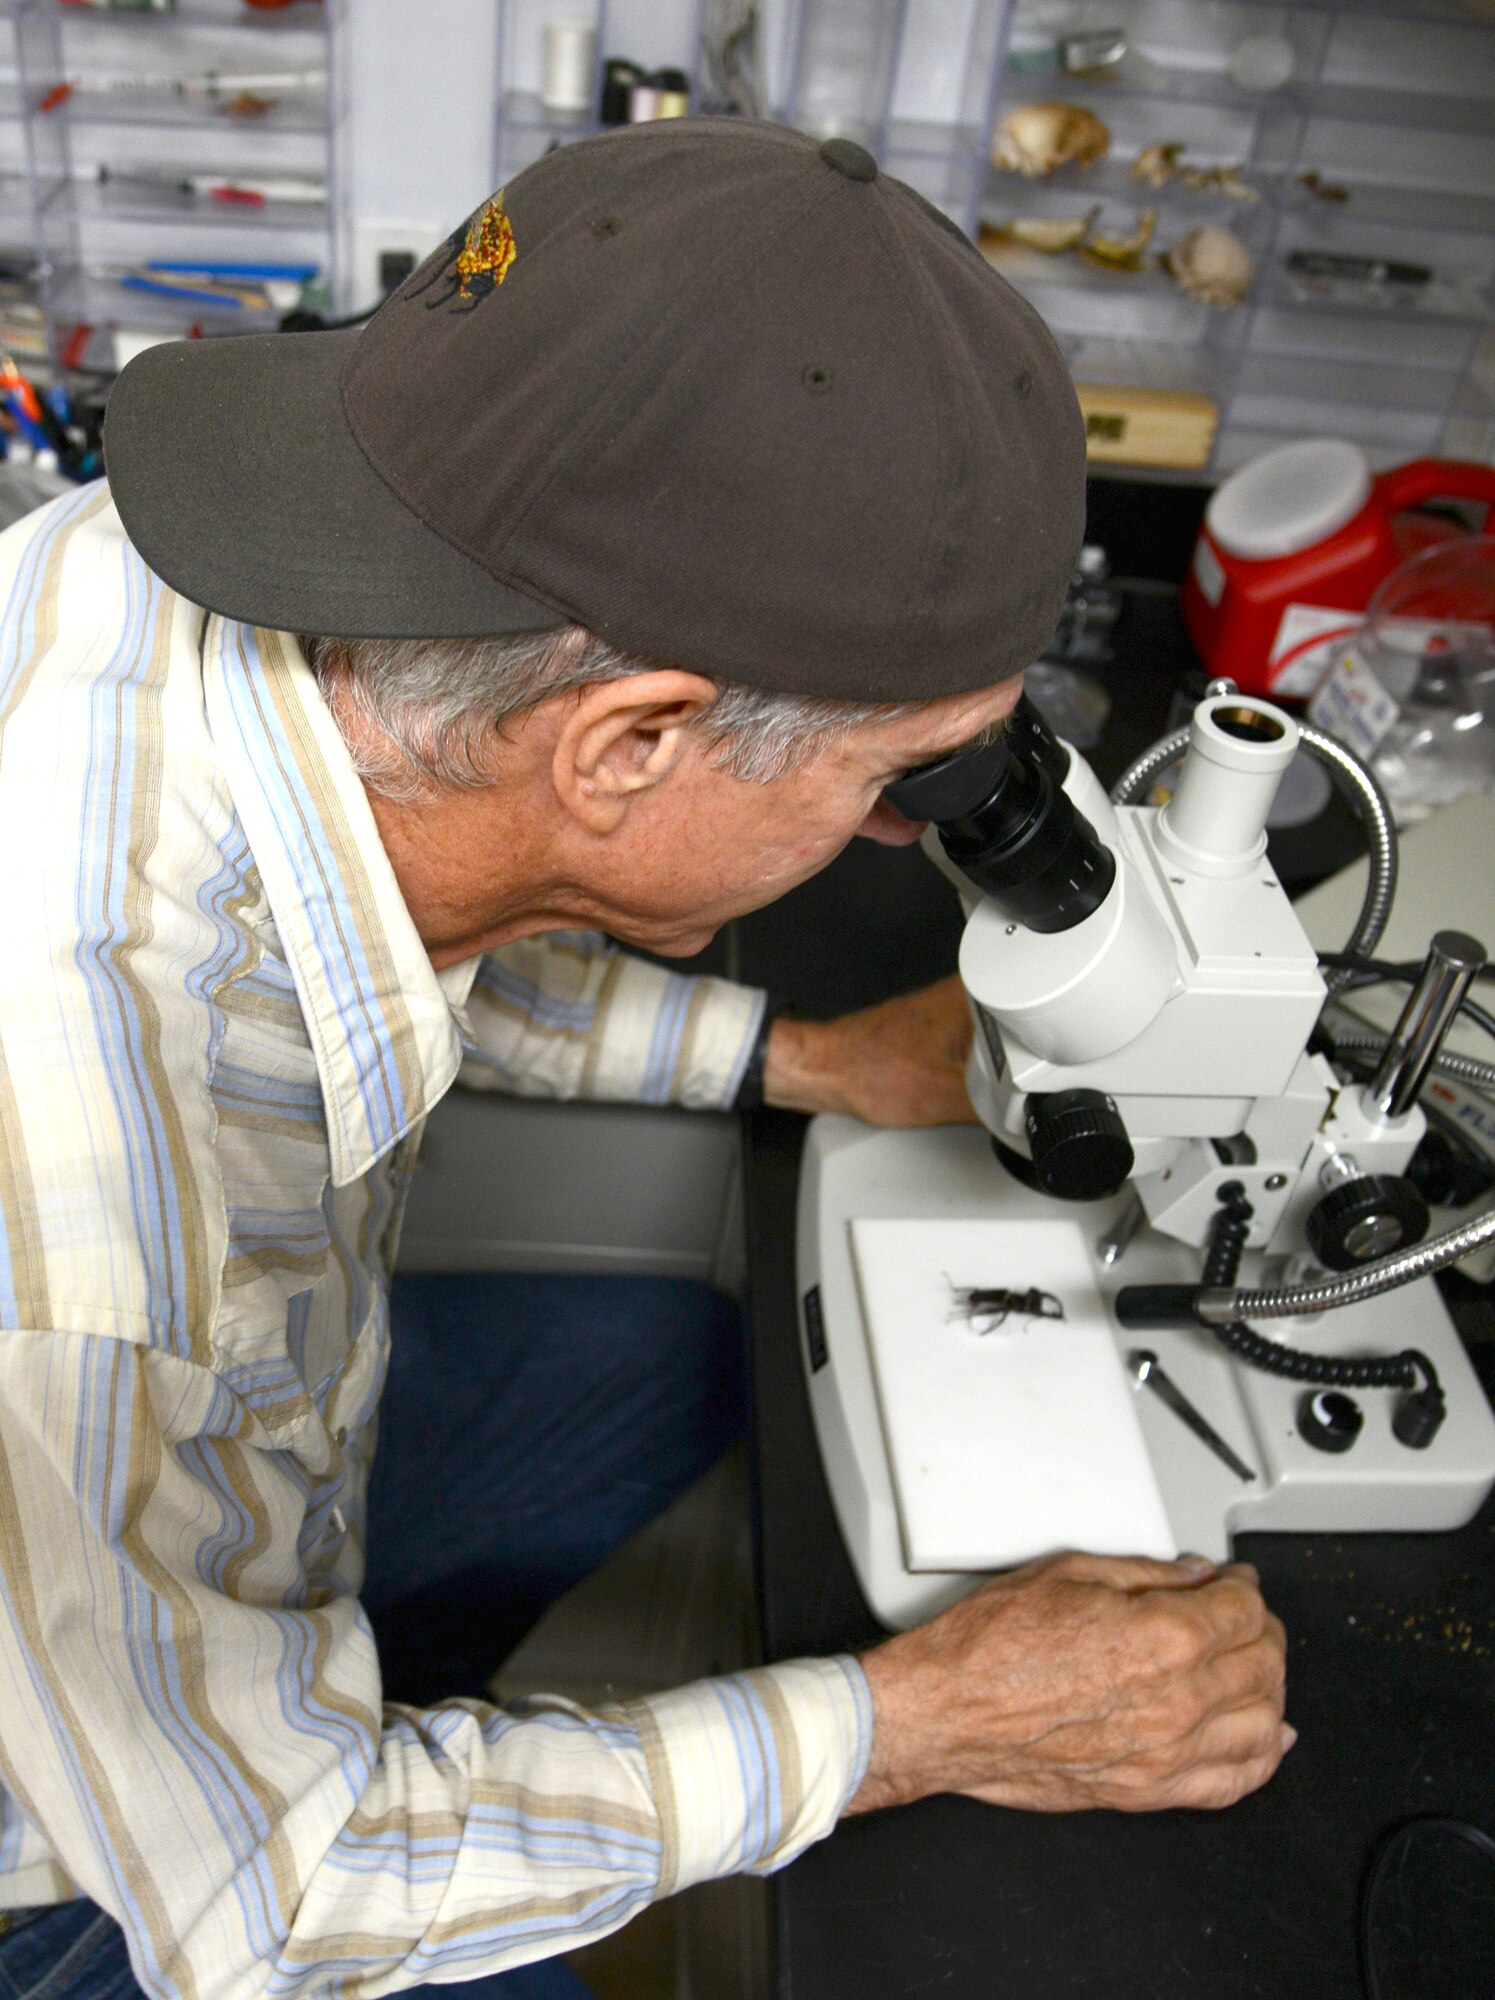 John Lee inspects an insect under a microscope in order to correctly identify it. Mr. Lee volunteers at the Natural Resources office to help collect and inventory insects found on Tinker Air Force Base, Okla.. (Air Force photo by Kelly White)